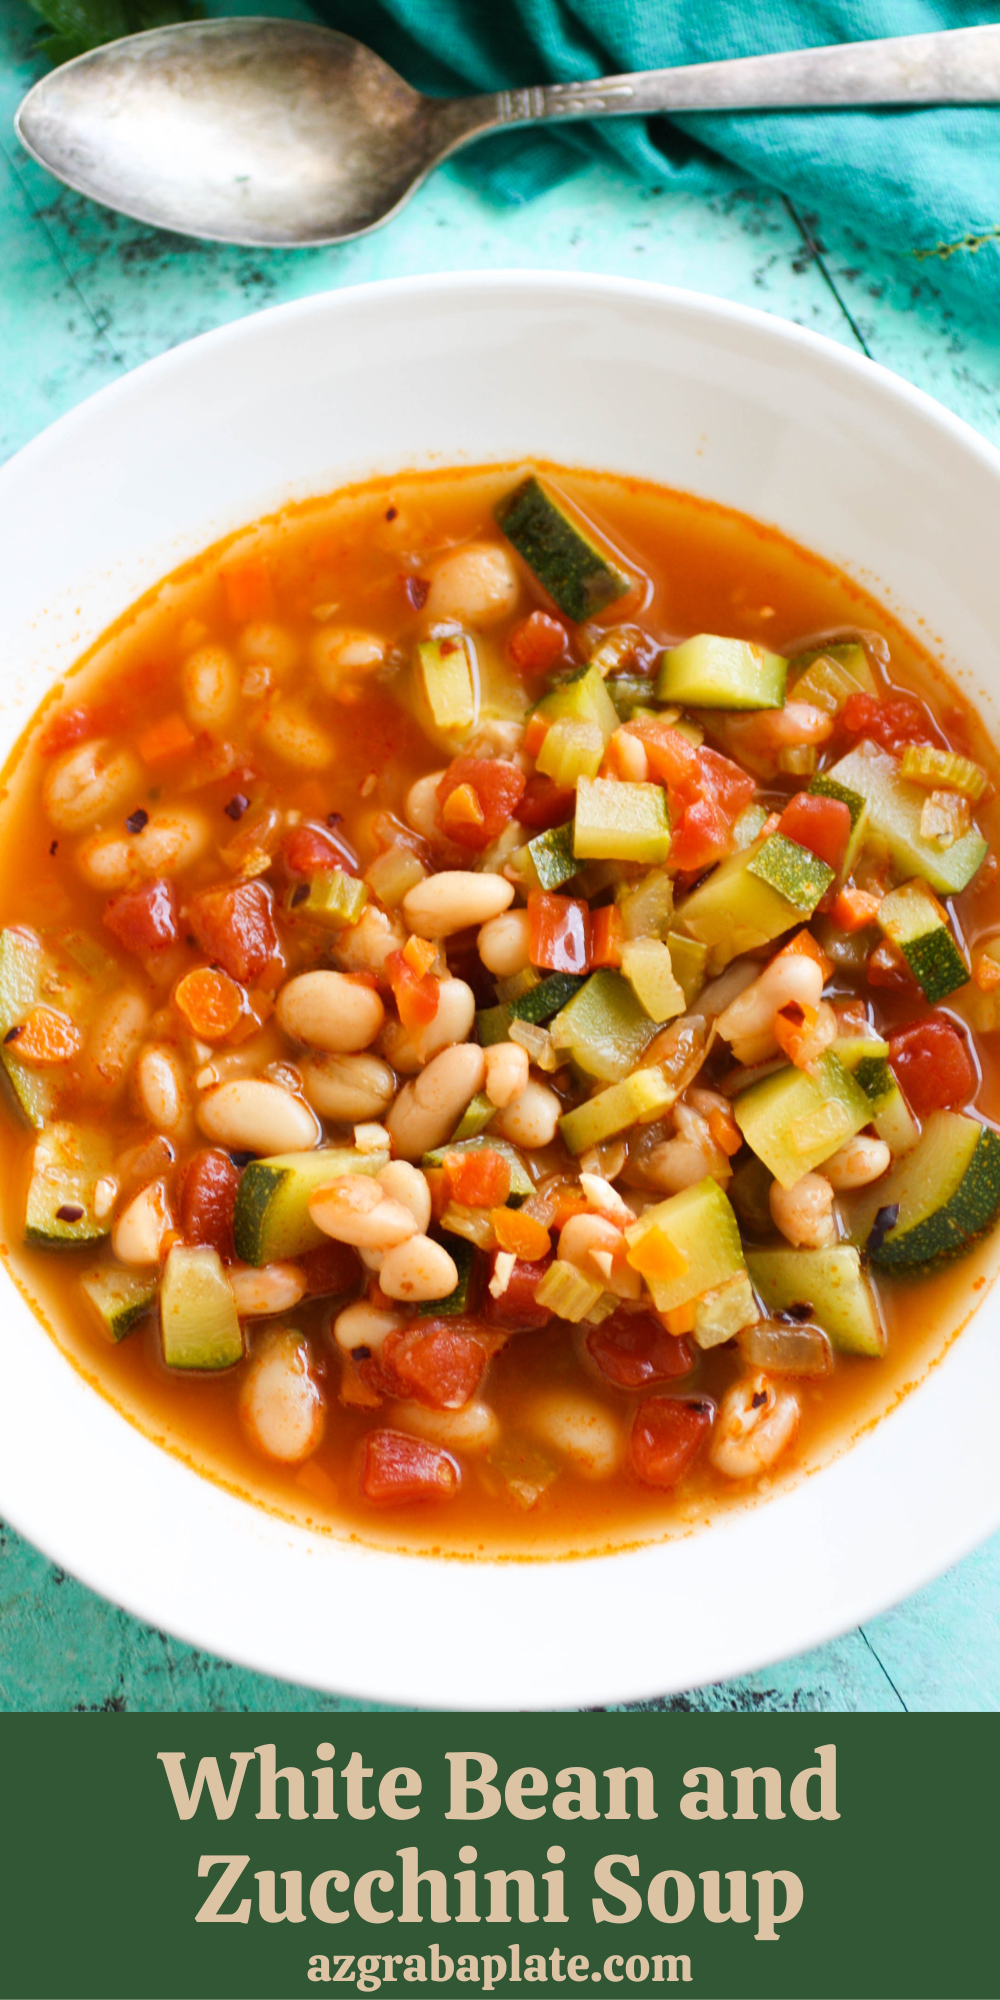 A big bowl of White Bean and Zucchini Soup